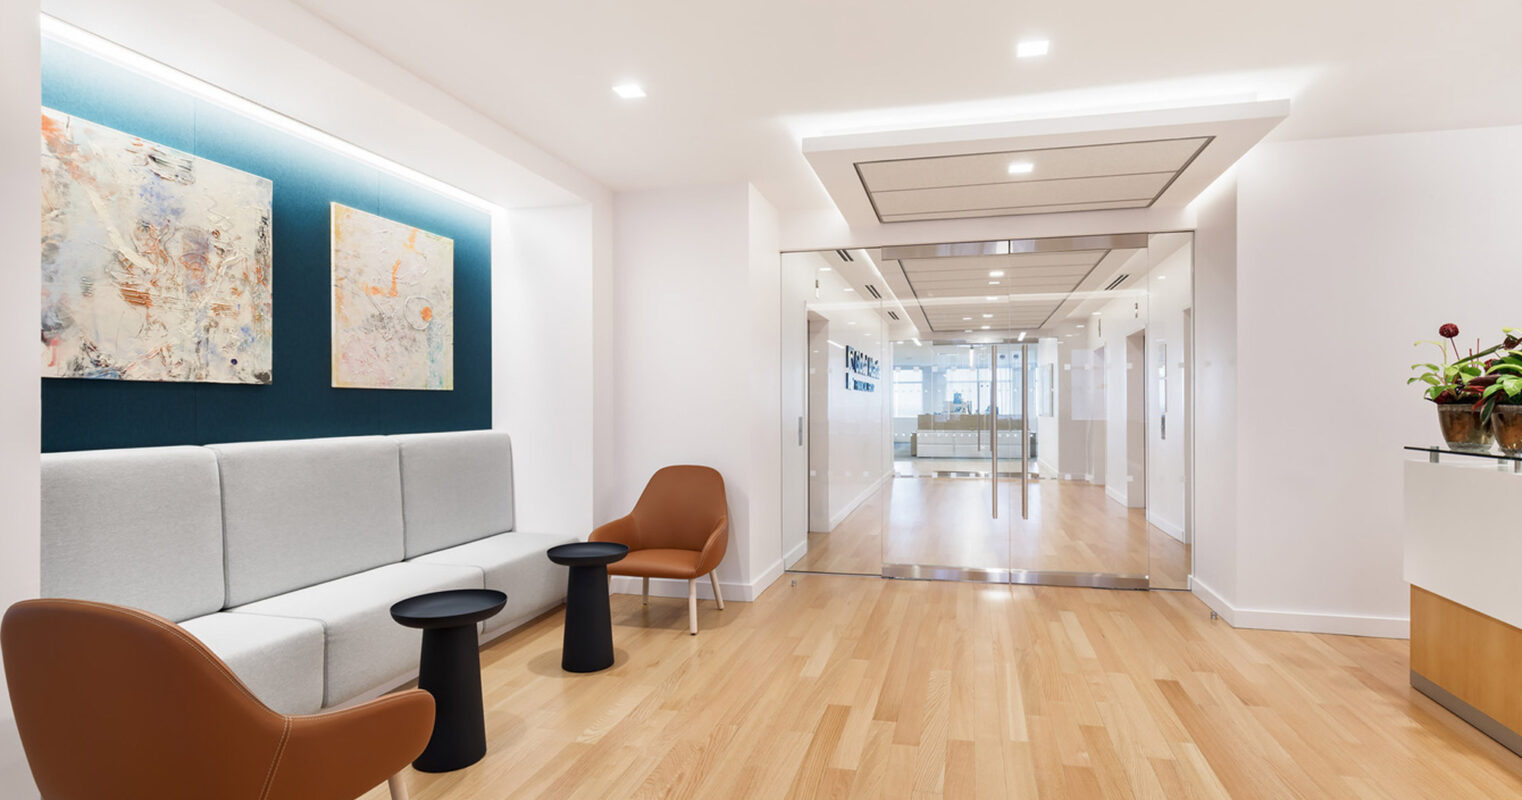 Spacious hallway featuring light hardwood flooring, white walls, and recessed ceiling lighting. A minimalist seating area with a gray sofa, vibrant abstract art, and brown accent chairs contrasts with the clinical glass-door entryway at the end of the corridor.